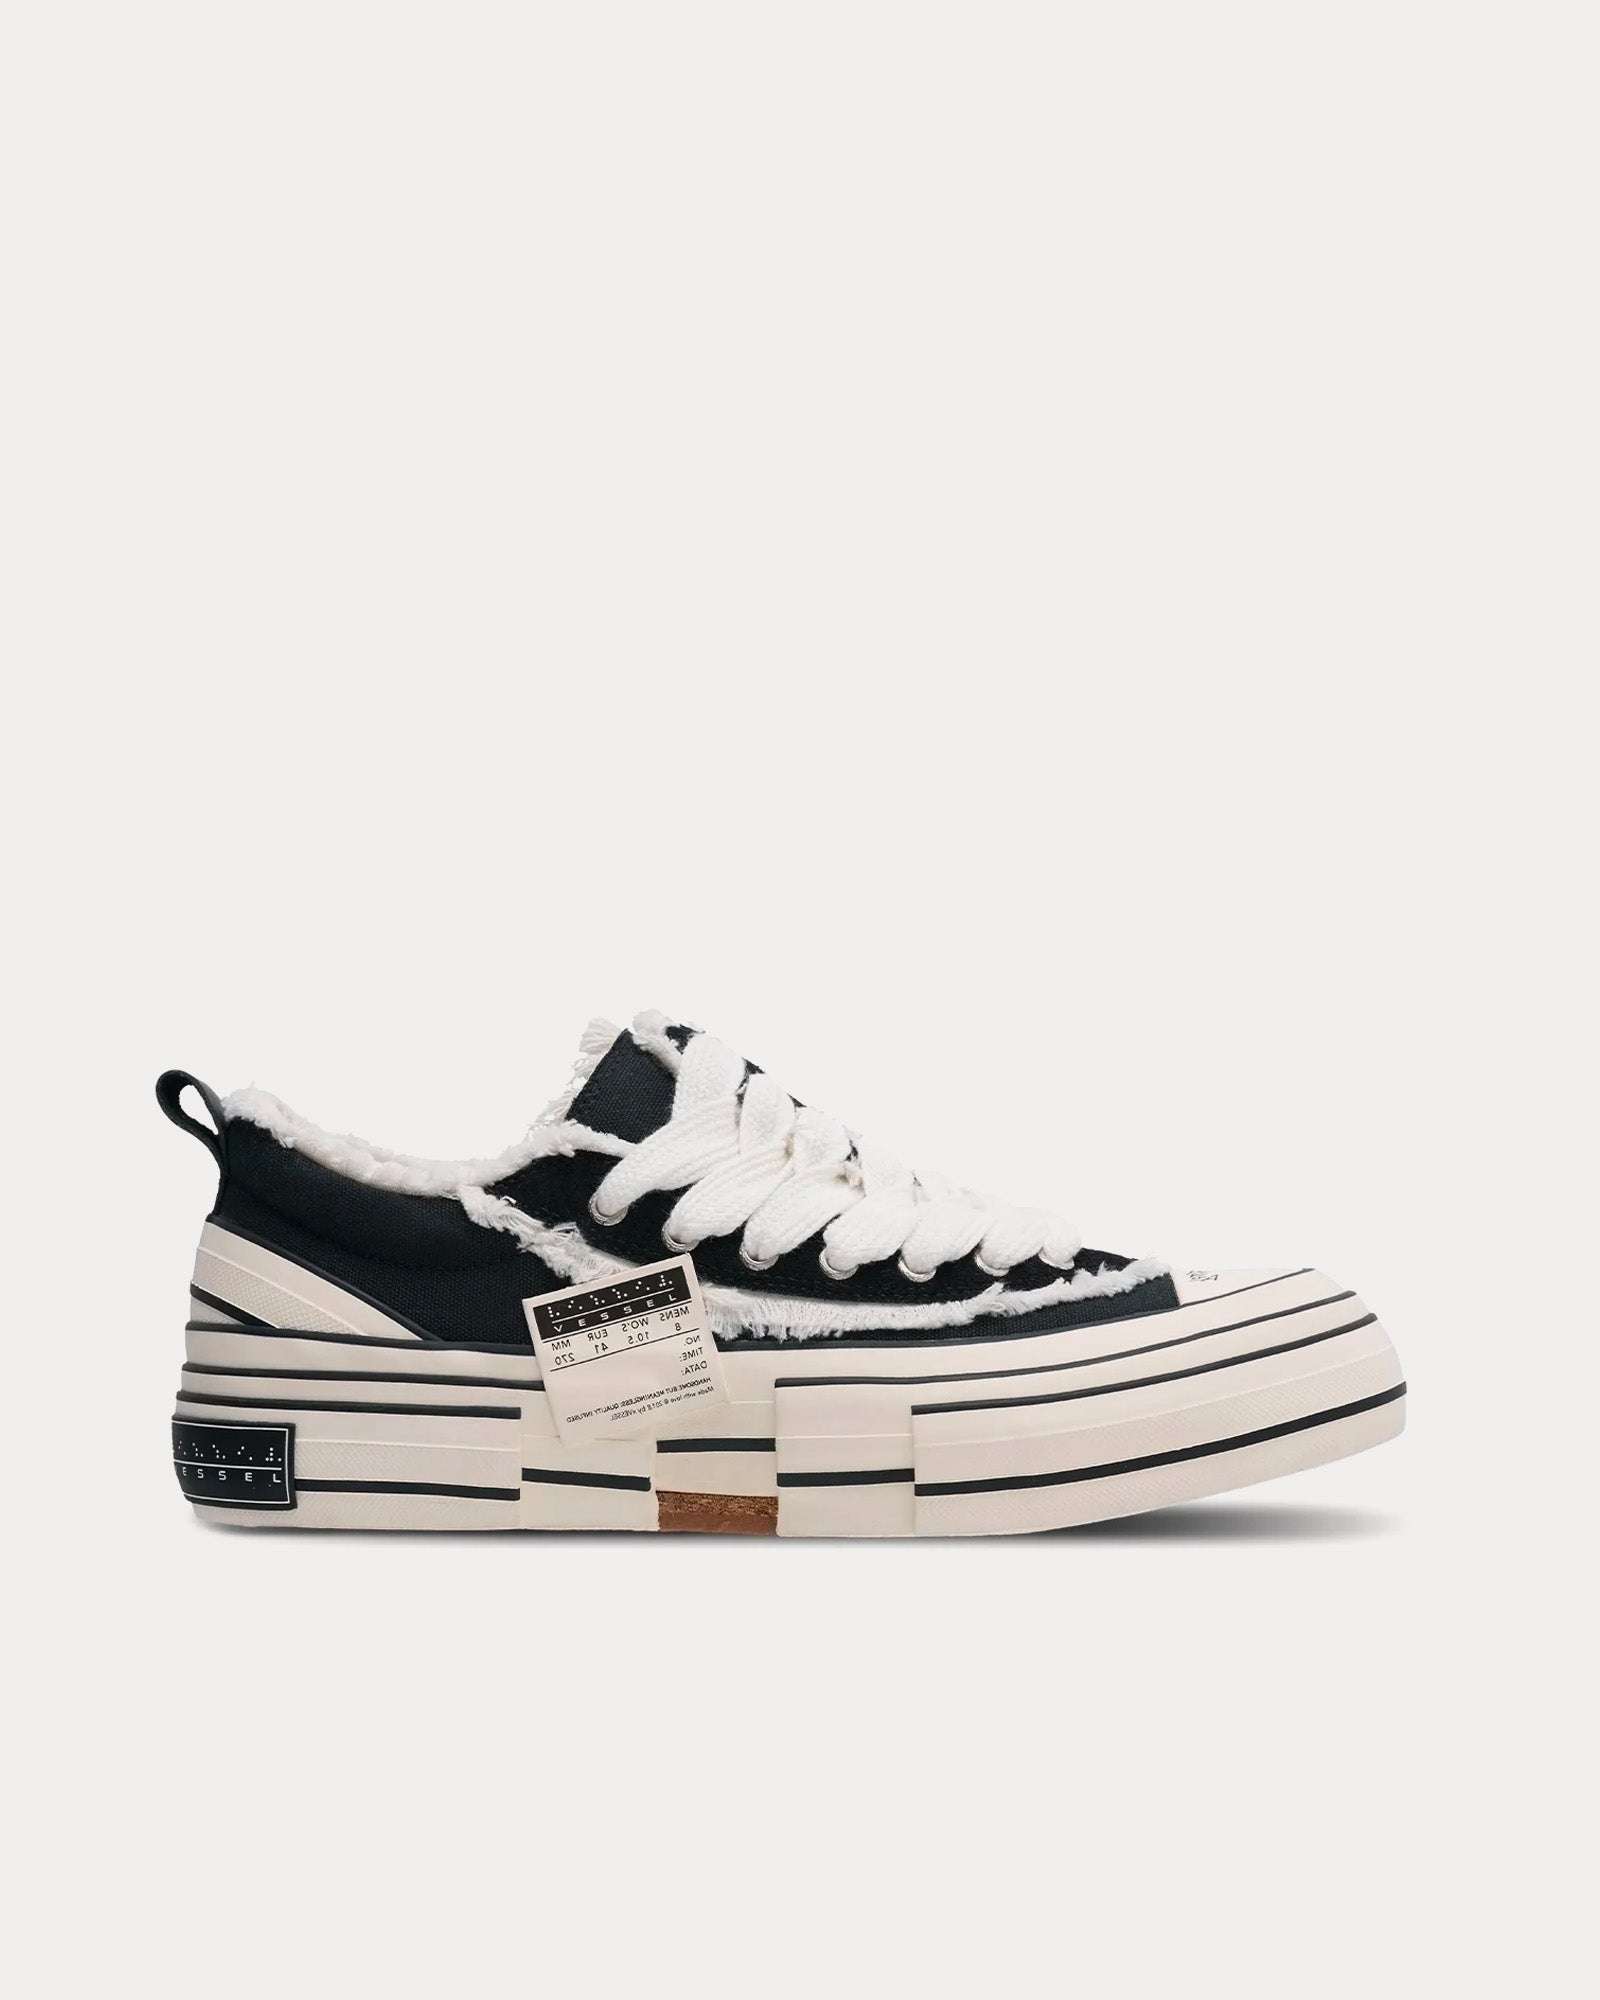 xVESSEL - Why-Shoe Black Low Top Sneakers